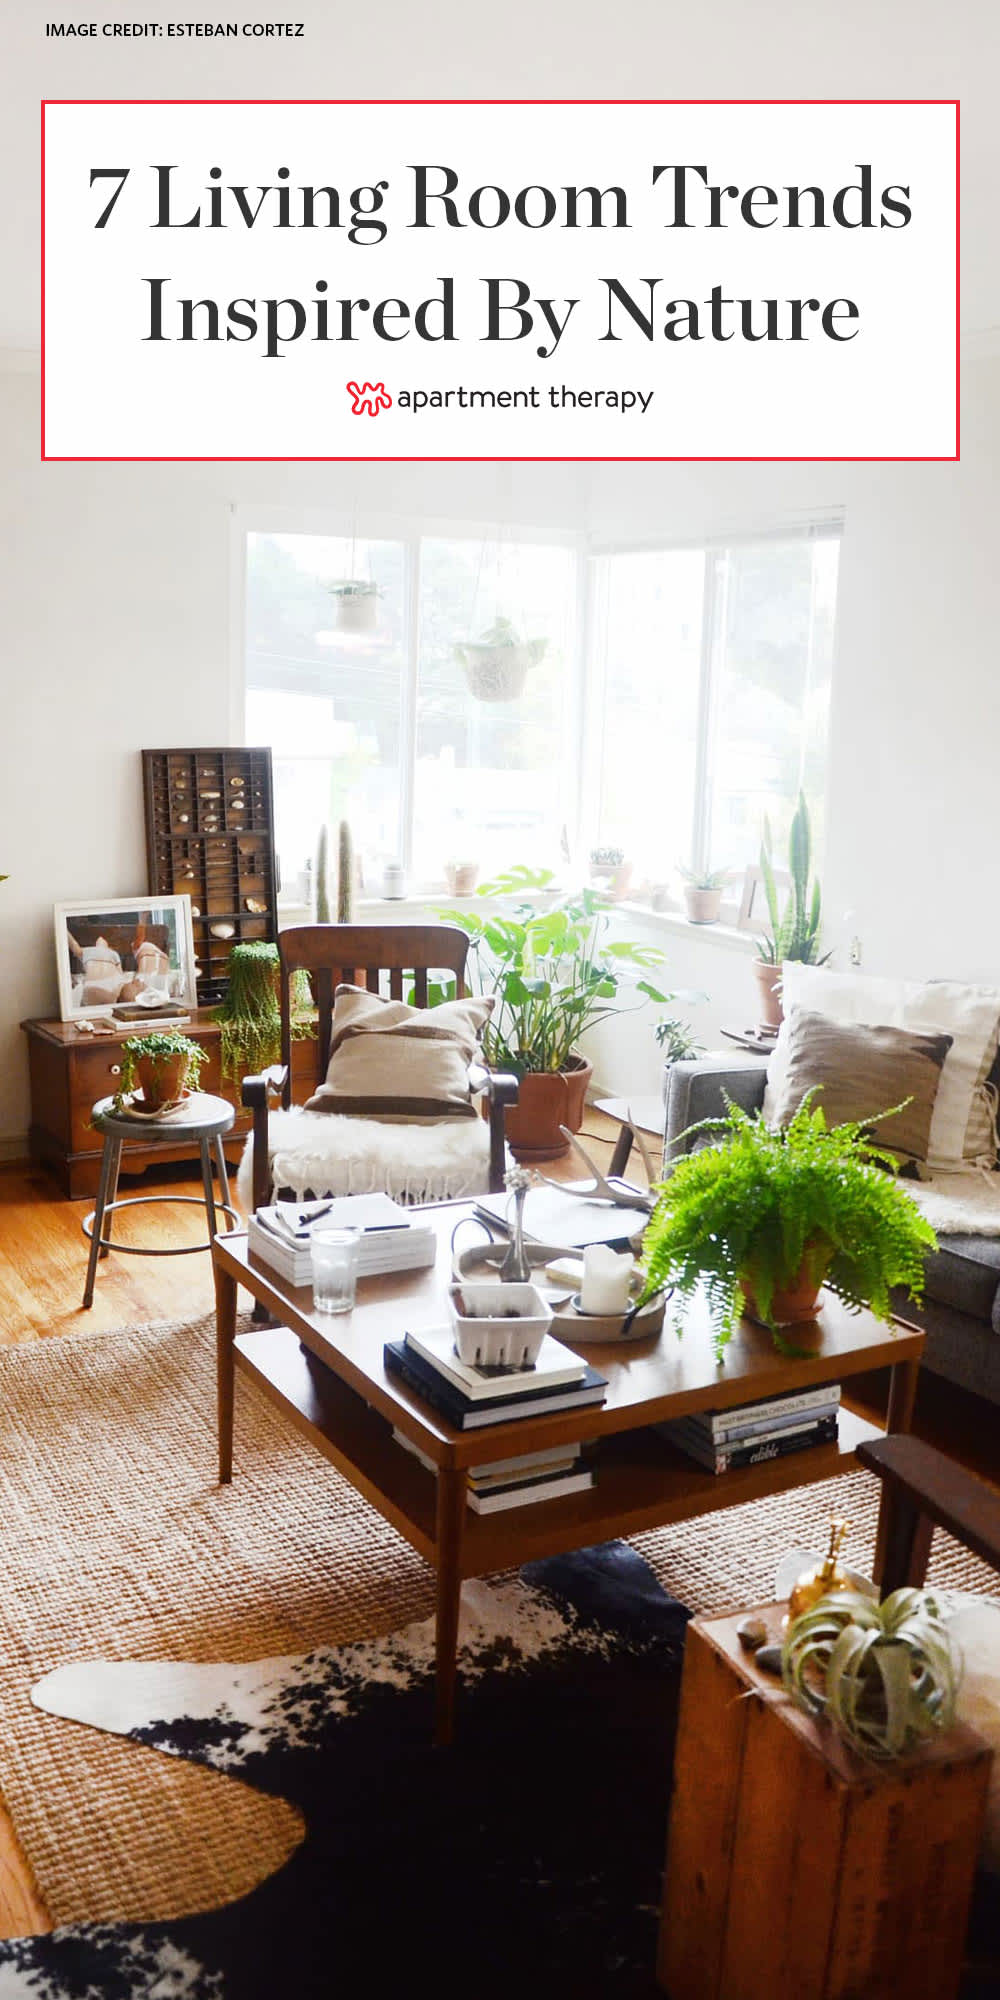 The Best Nature-Inspired Living Room Trends | Apartment Therapy